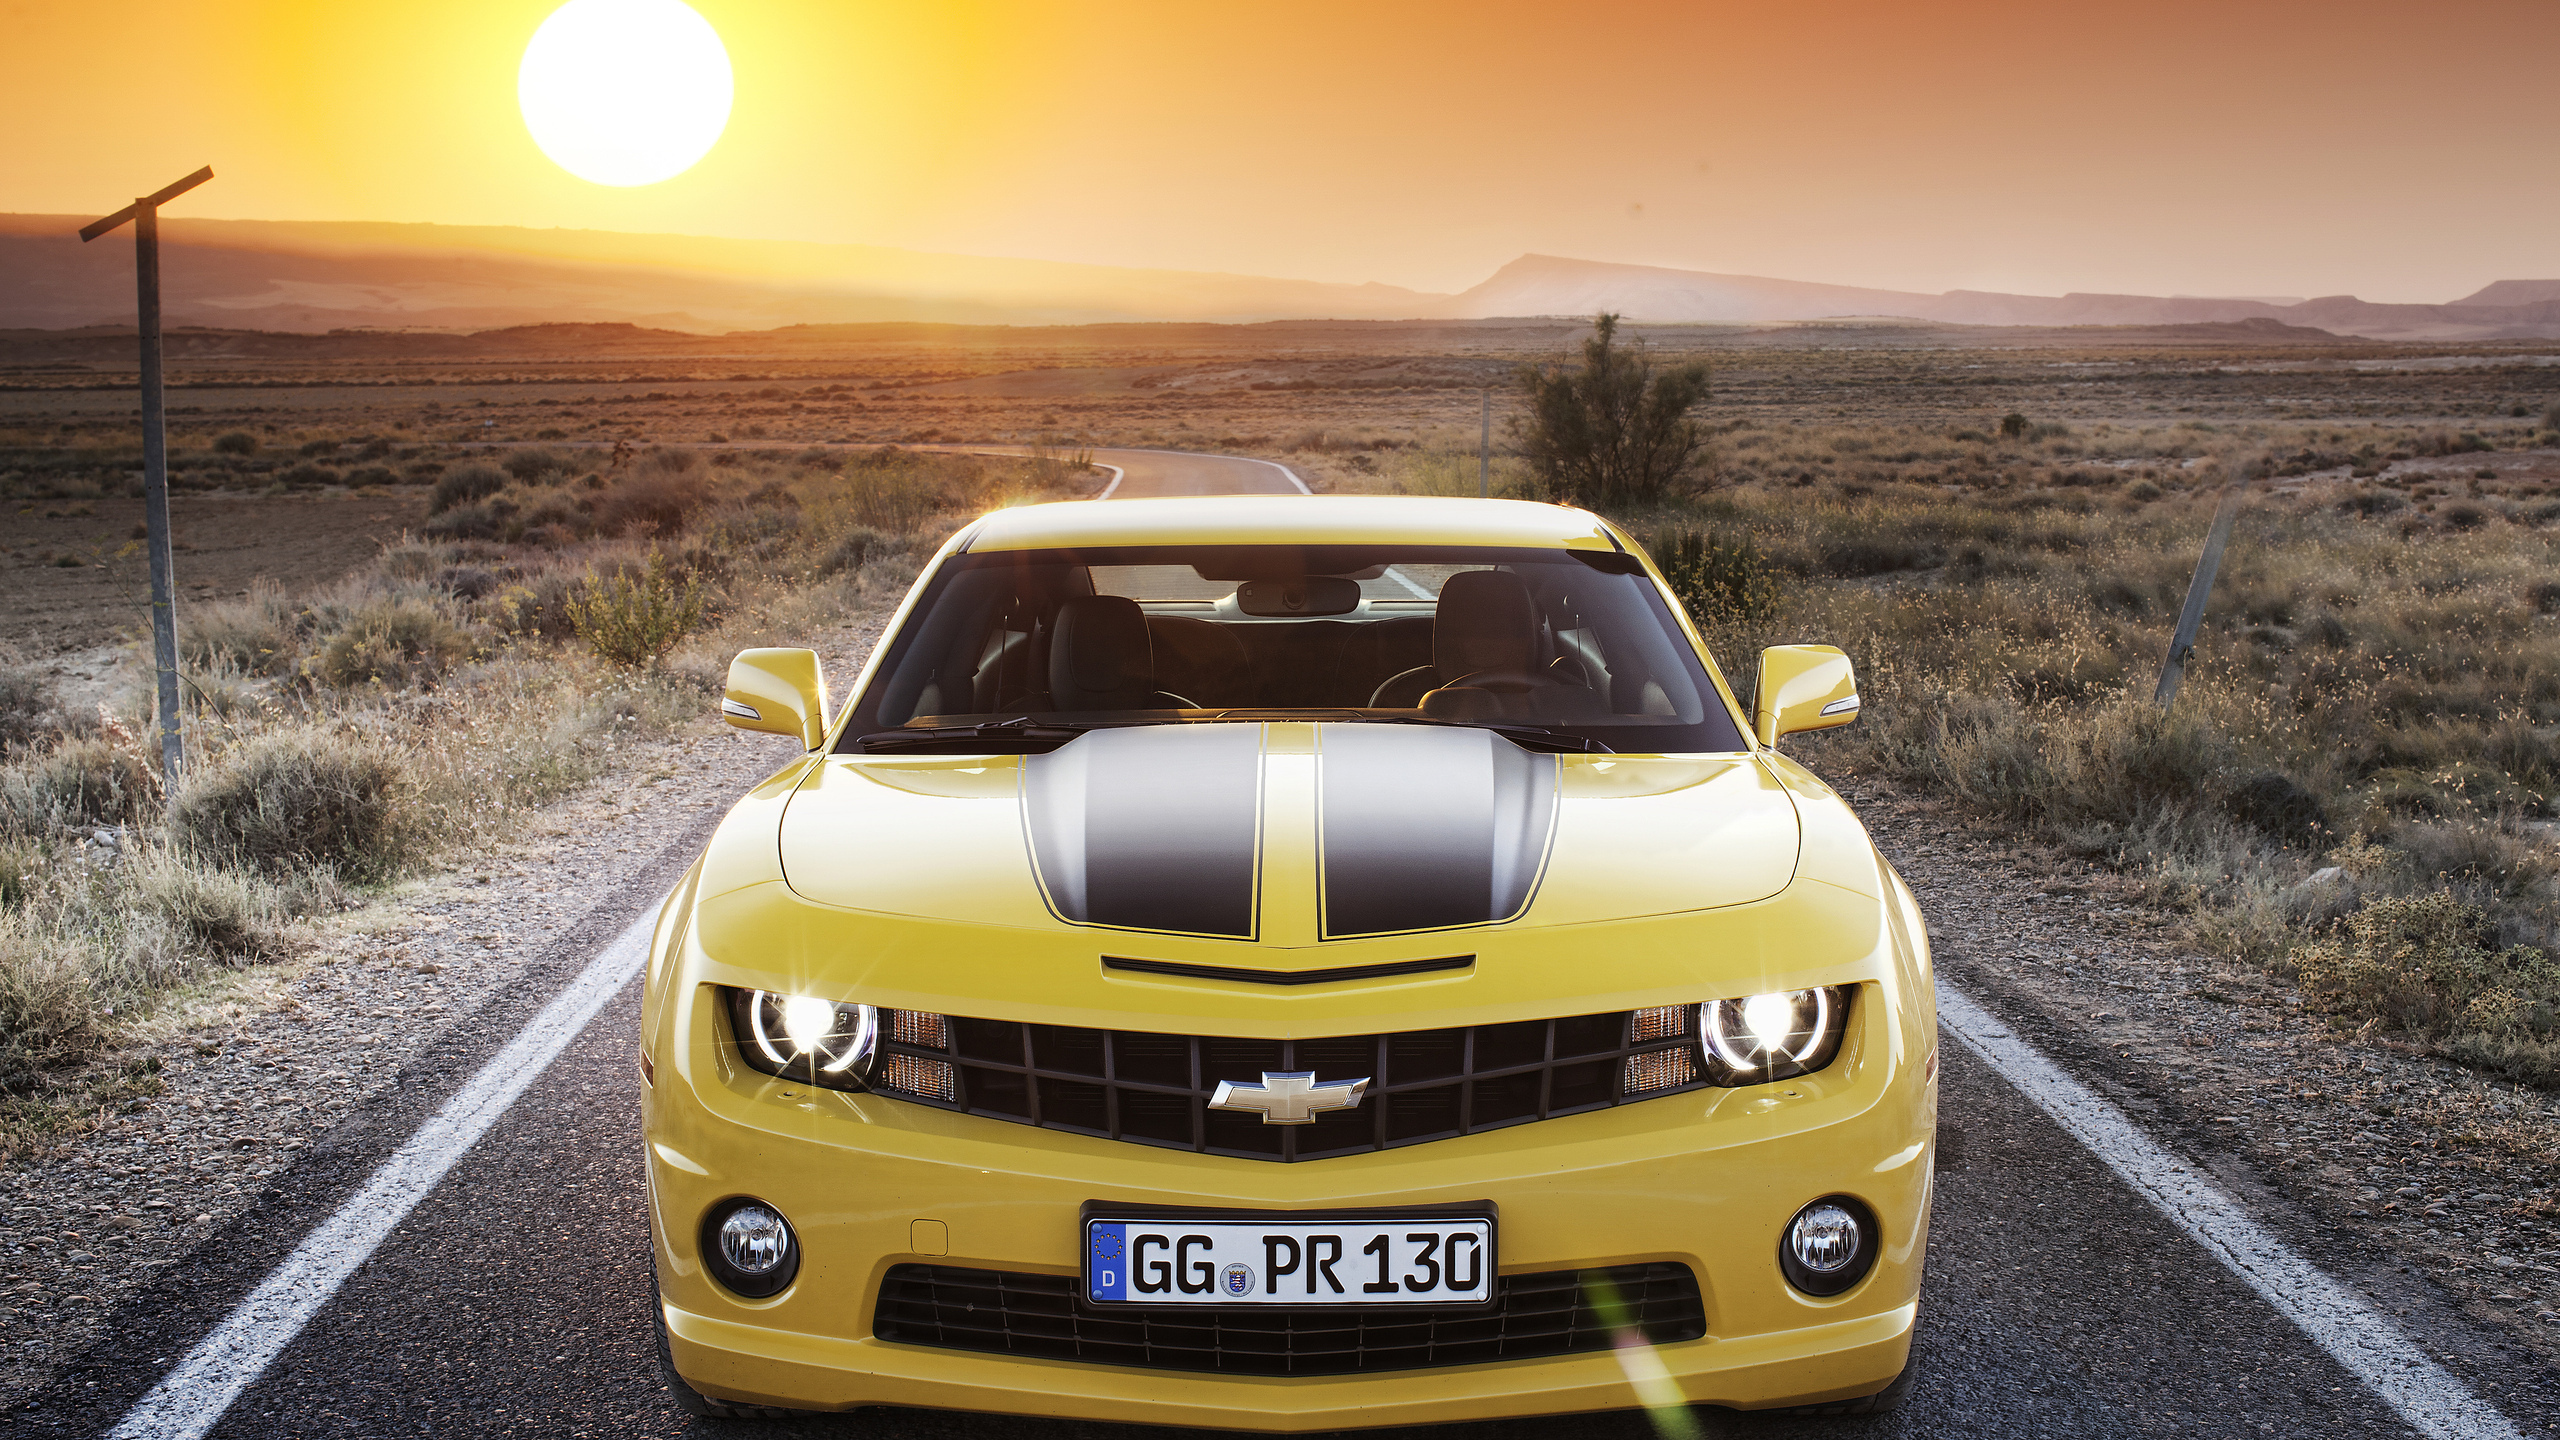 Ford Mustang Yellow Car Premium wall poster all cars wall poster for  room(no need tape,size:12x18 inch) Paper Print - Vehicles posters in India  - Buy art, film, design, movie, music, nature and